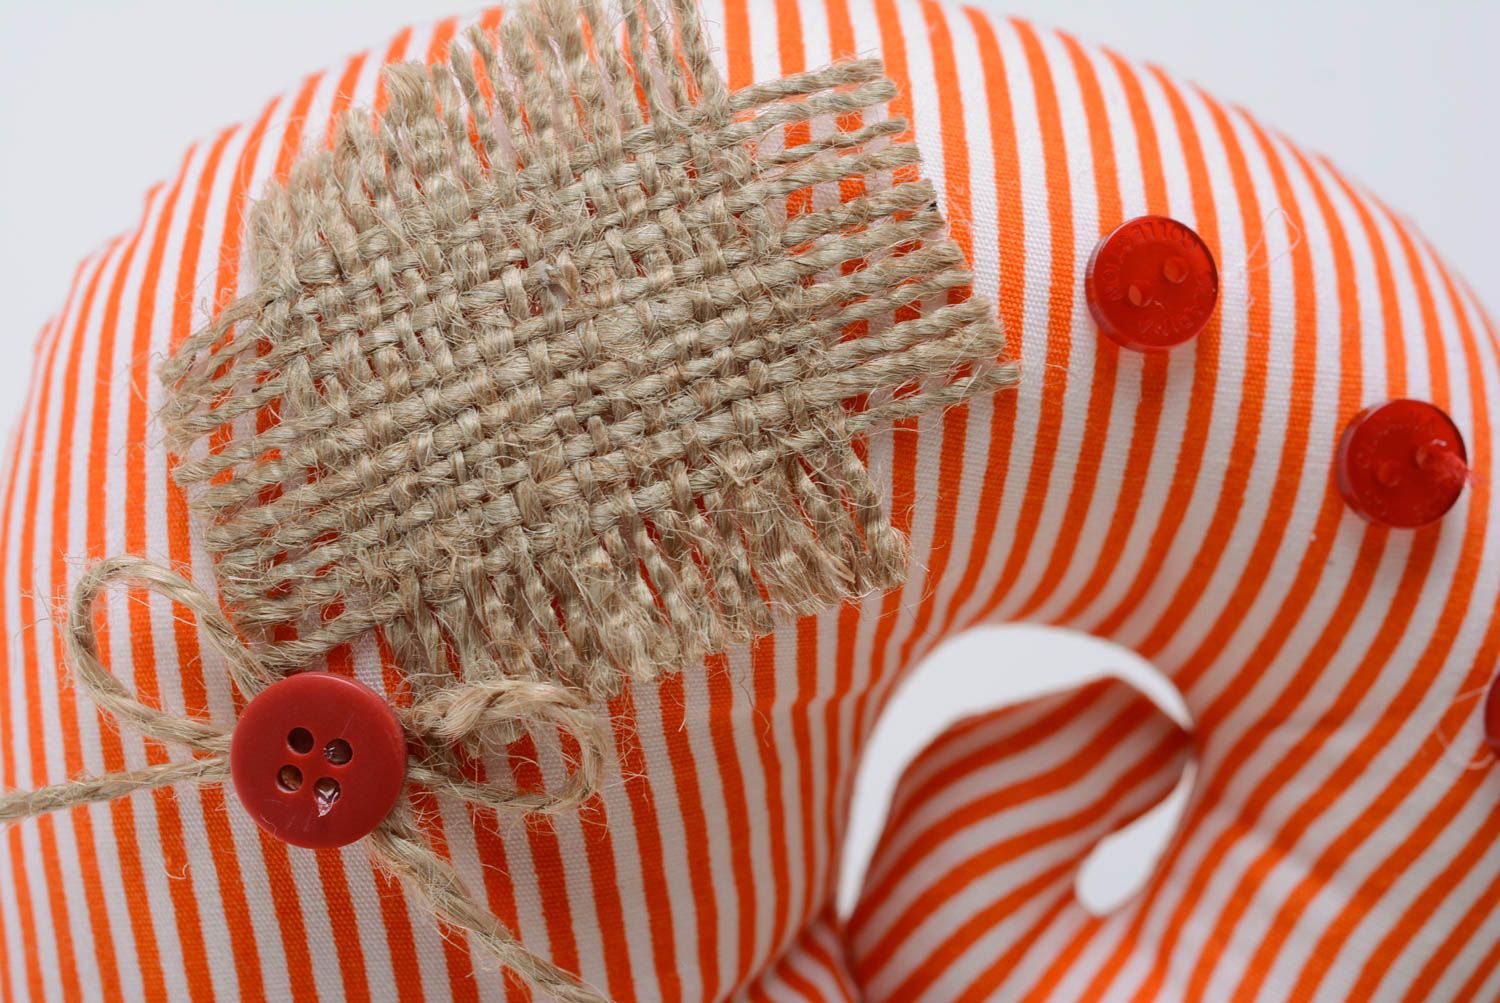 Soft snail toy made of cotton and holofiber red striped toy for home decor photo 4